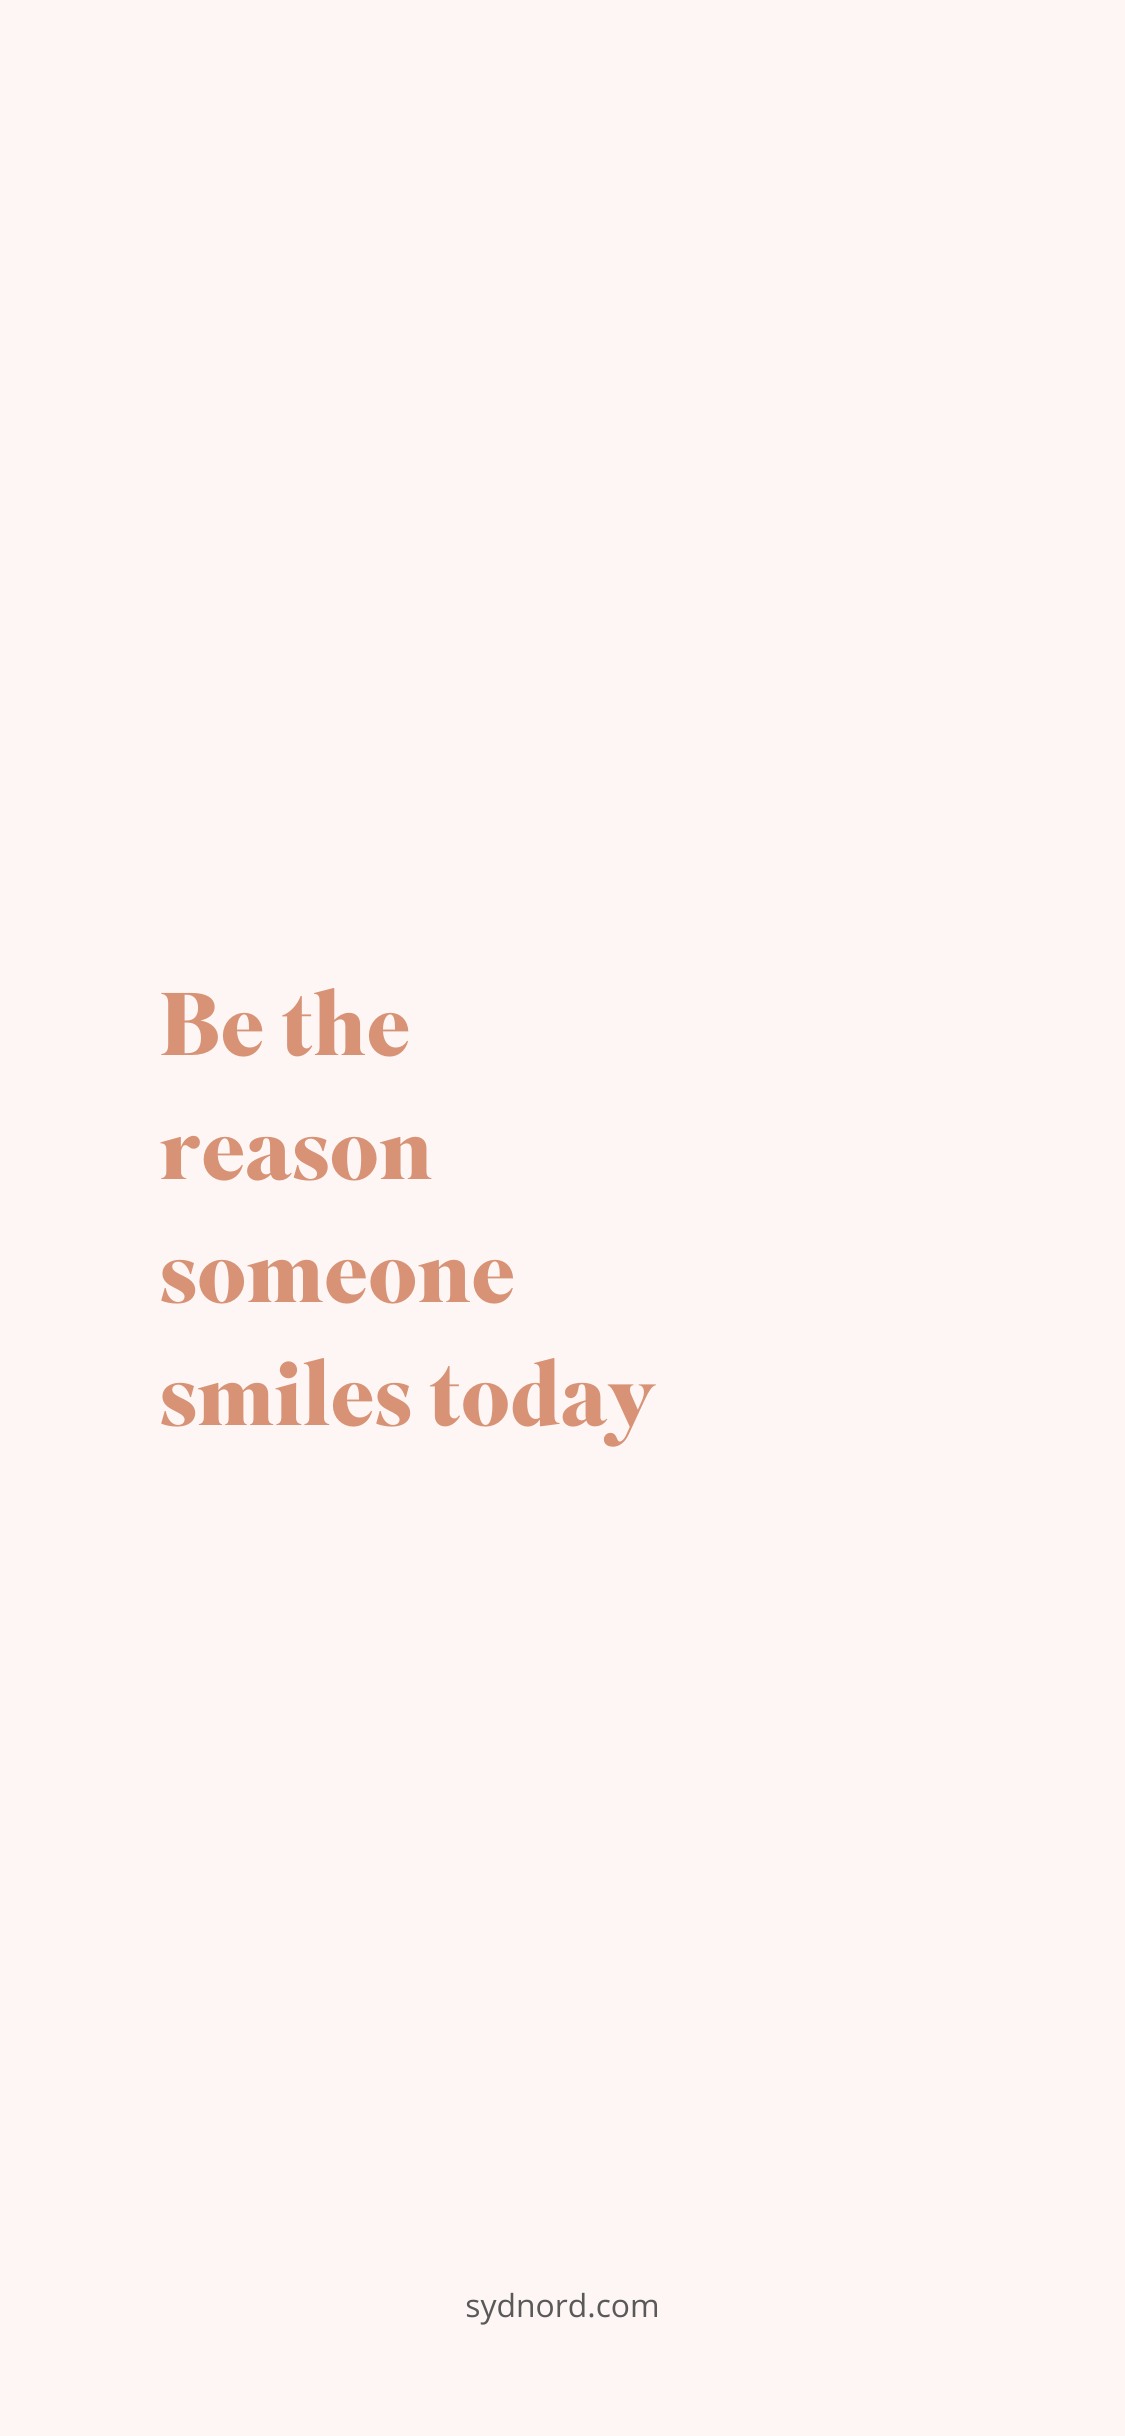 Positive quotes to live by, "Be the reason someone smiles today"